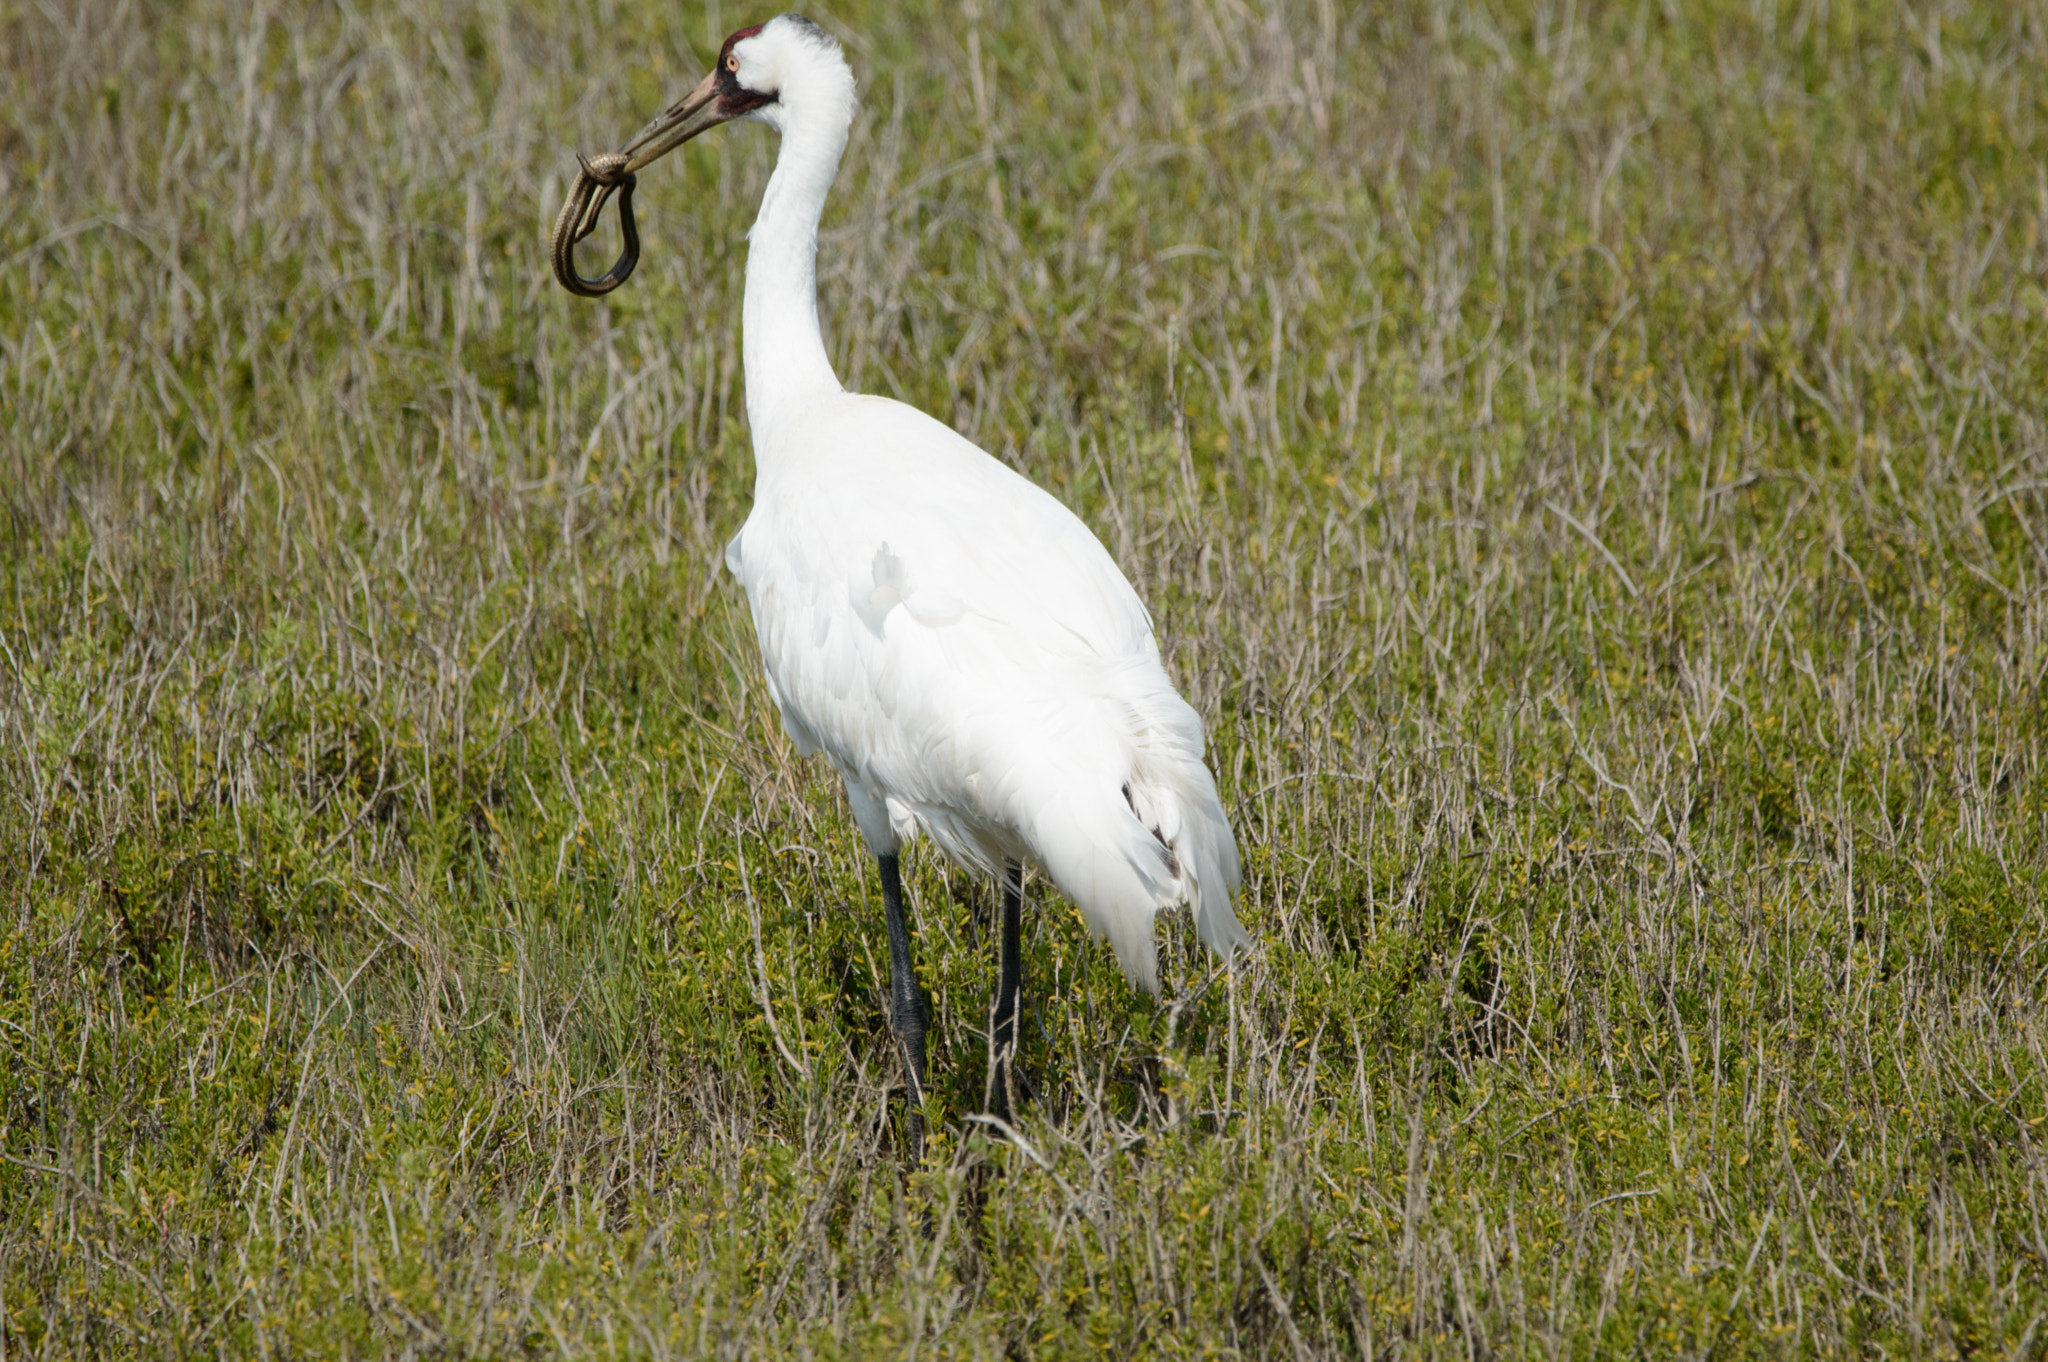 Nikon D3200 + Sigma 150-600mm F5-6.3 DG OS HSM | C sample photo. Whooping crane with snake photography